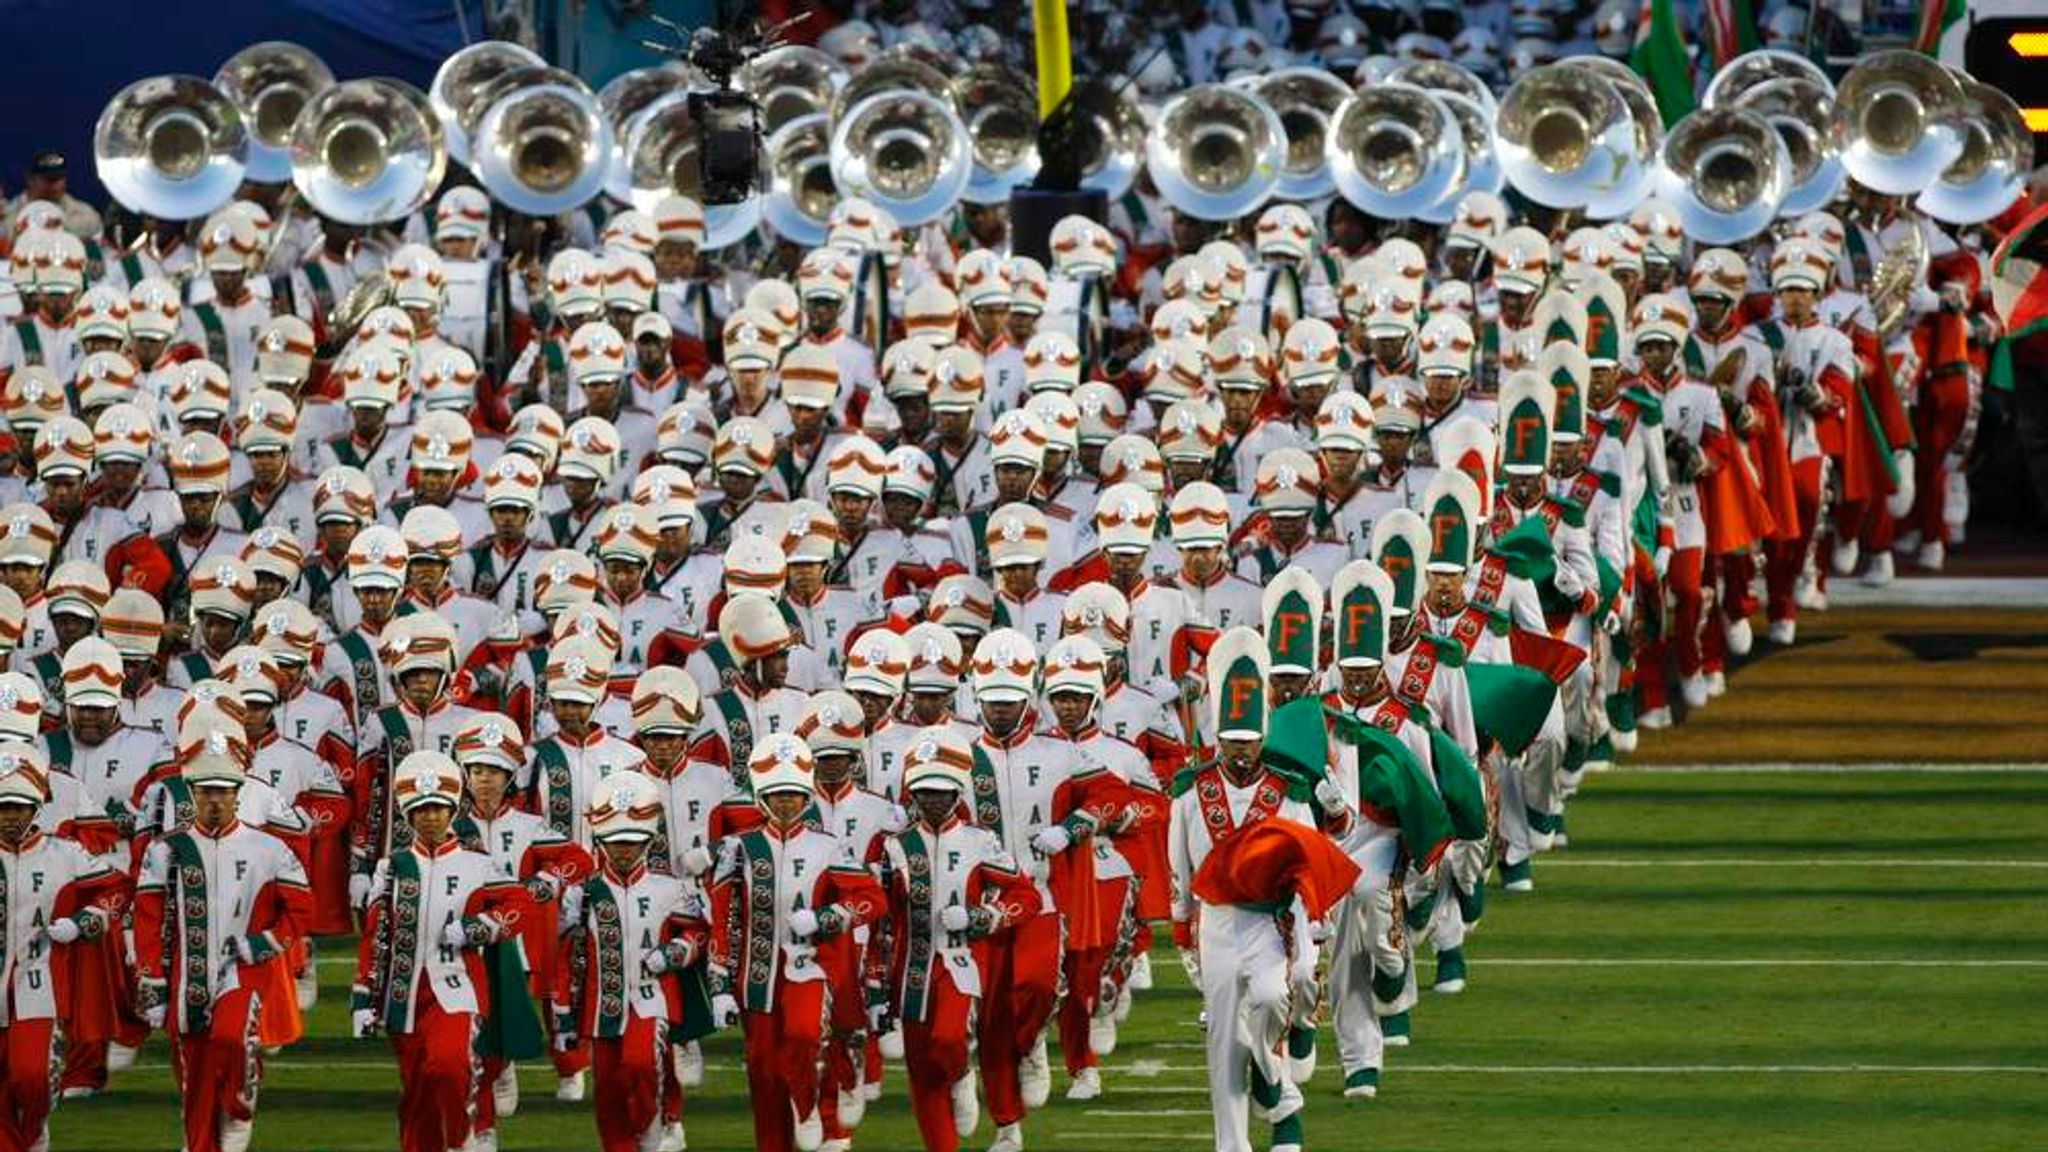 FAMU Lifts Suspension of Famed Marching Band After Hazing Death - ABC News